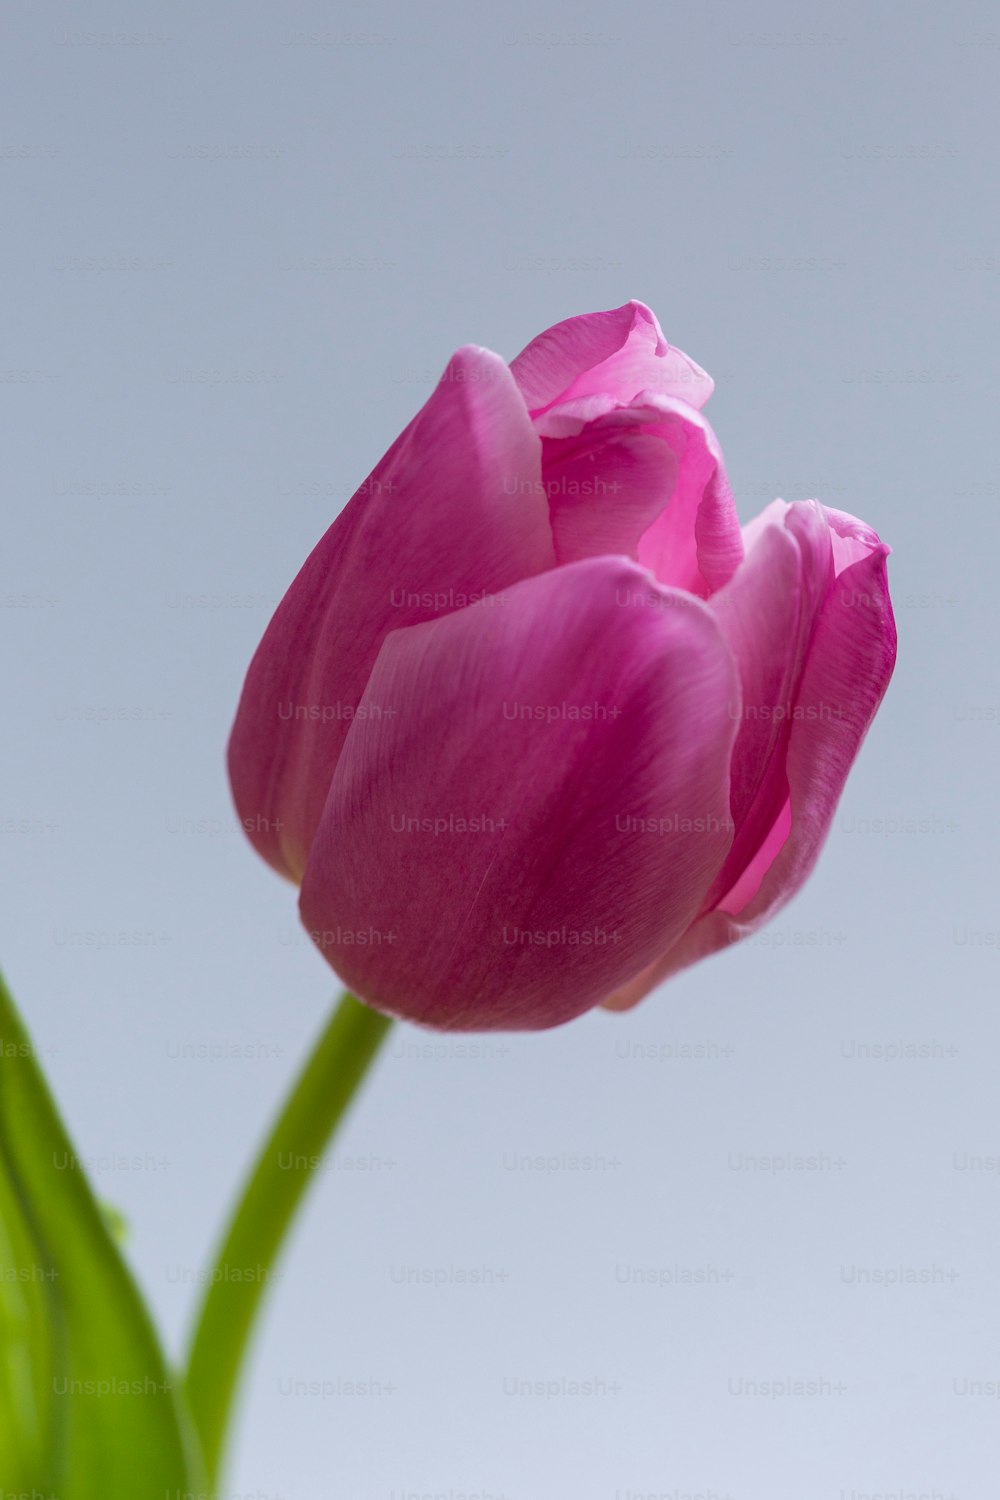 a single pink tulip in front of a blue sky